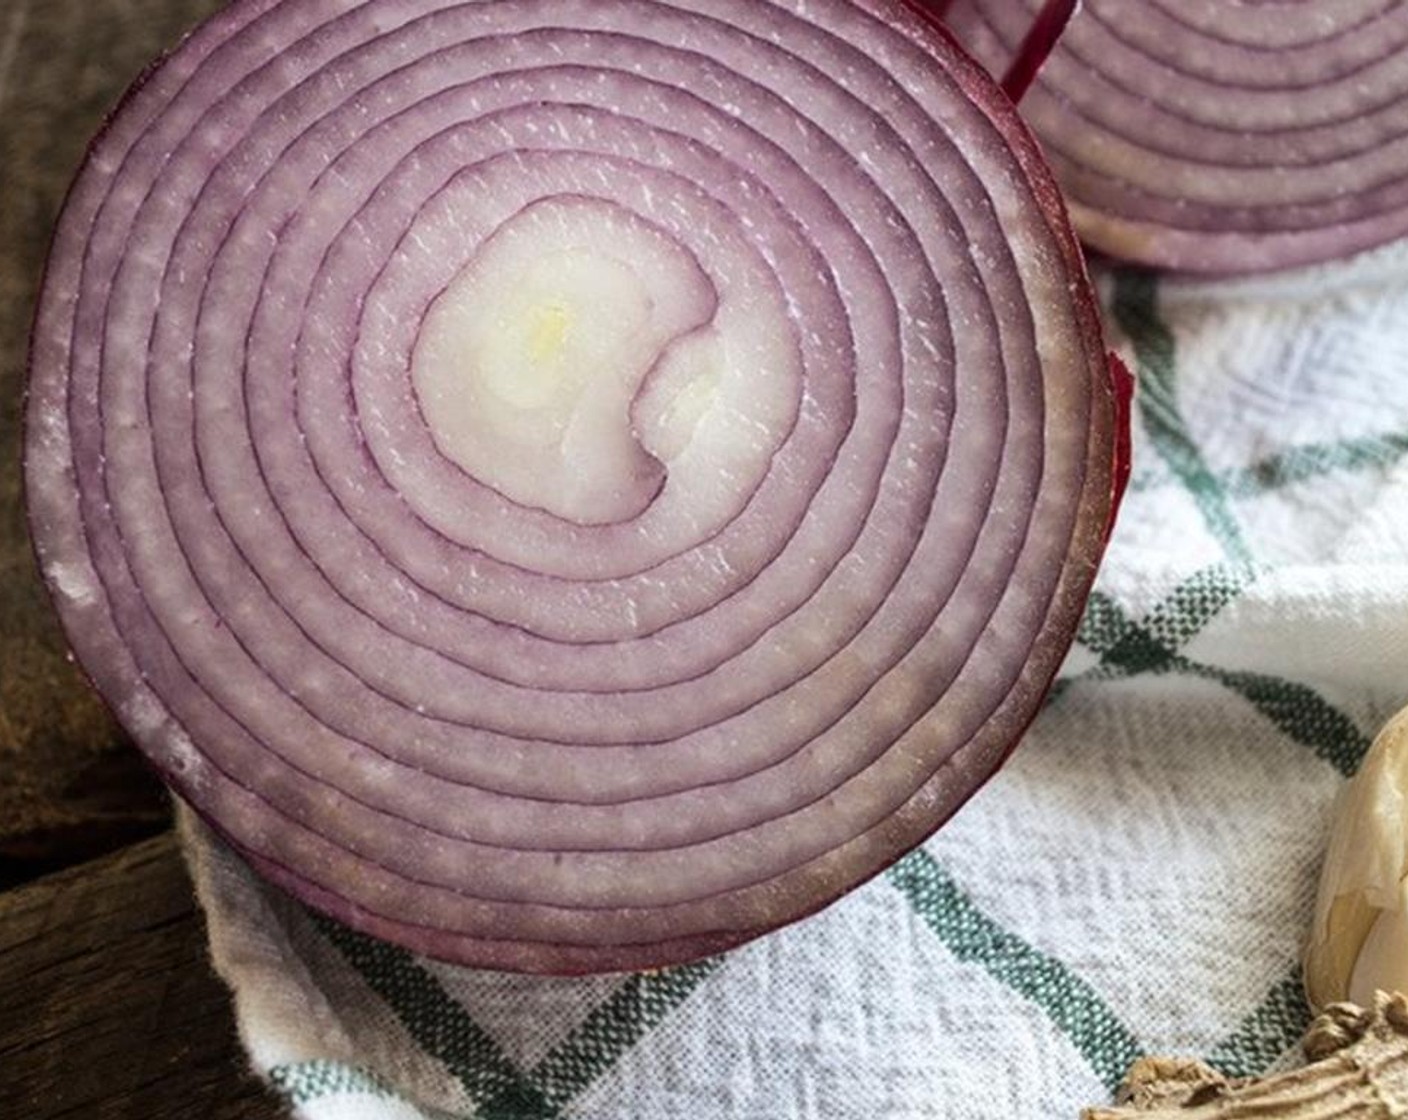 step 4 Meanwhile, add Coconut Oil (1/2 Tbsp), Red Onion (1), and Garlic (2 cloves) to large saucepan, cook over medium heat for 3 to 5 minutes.